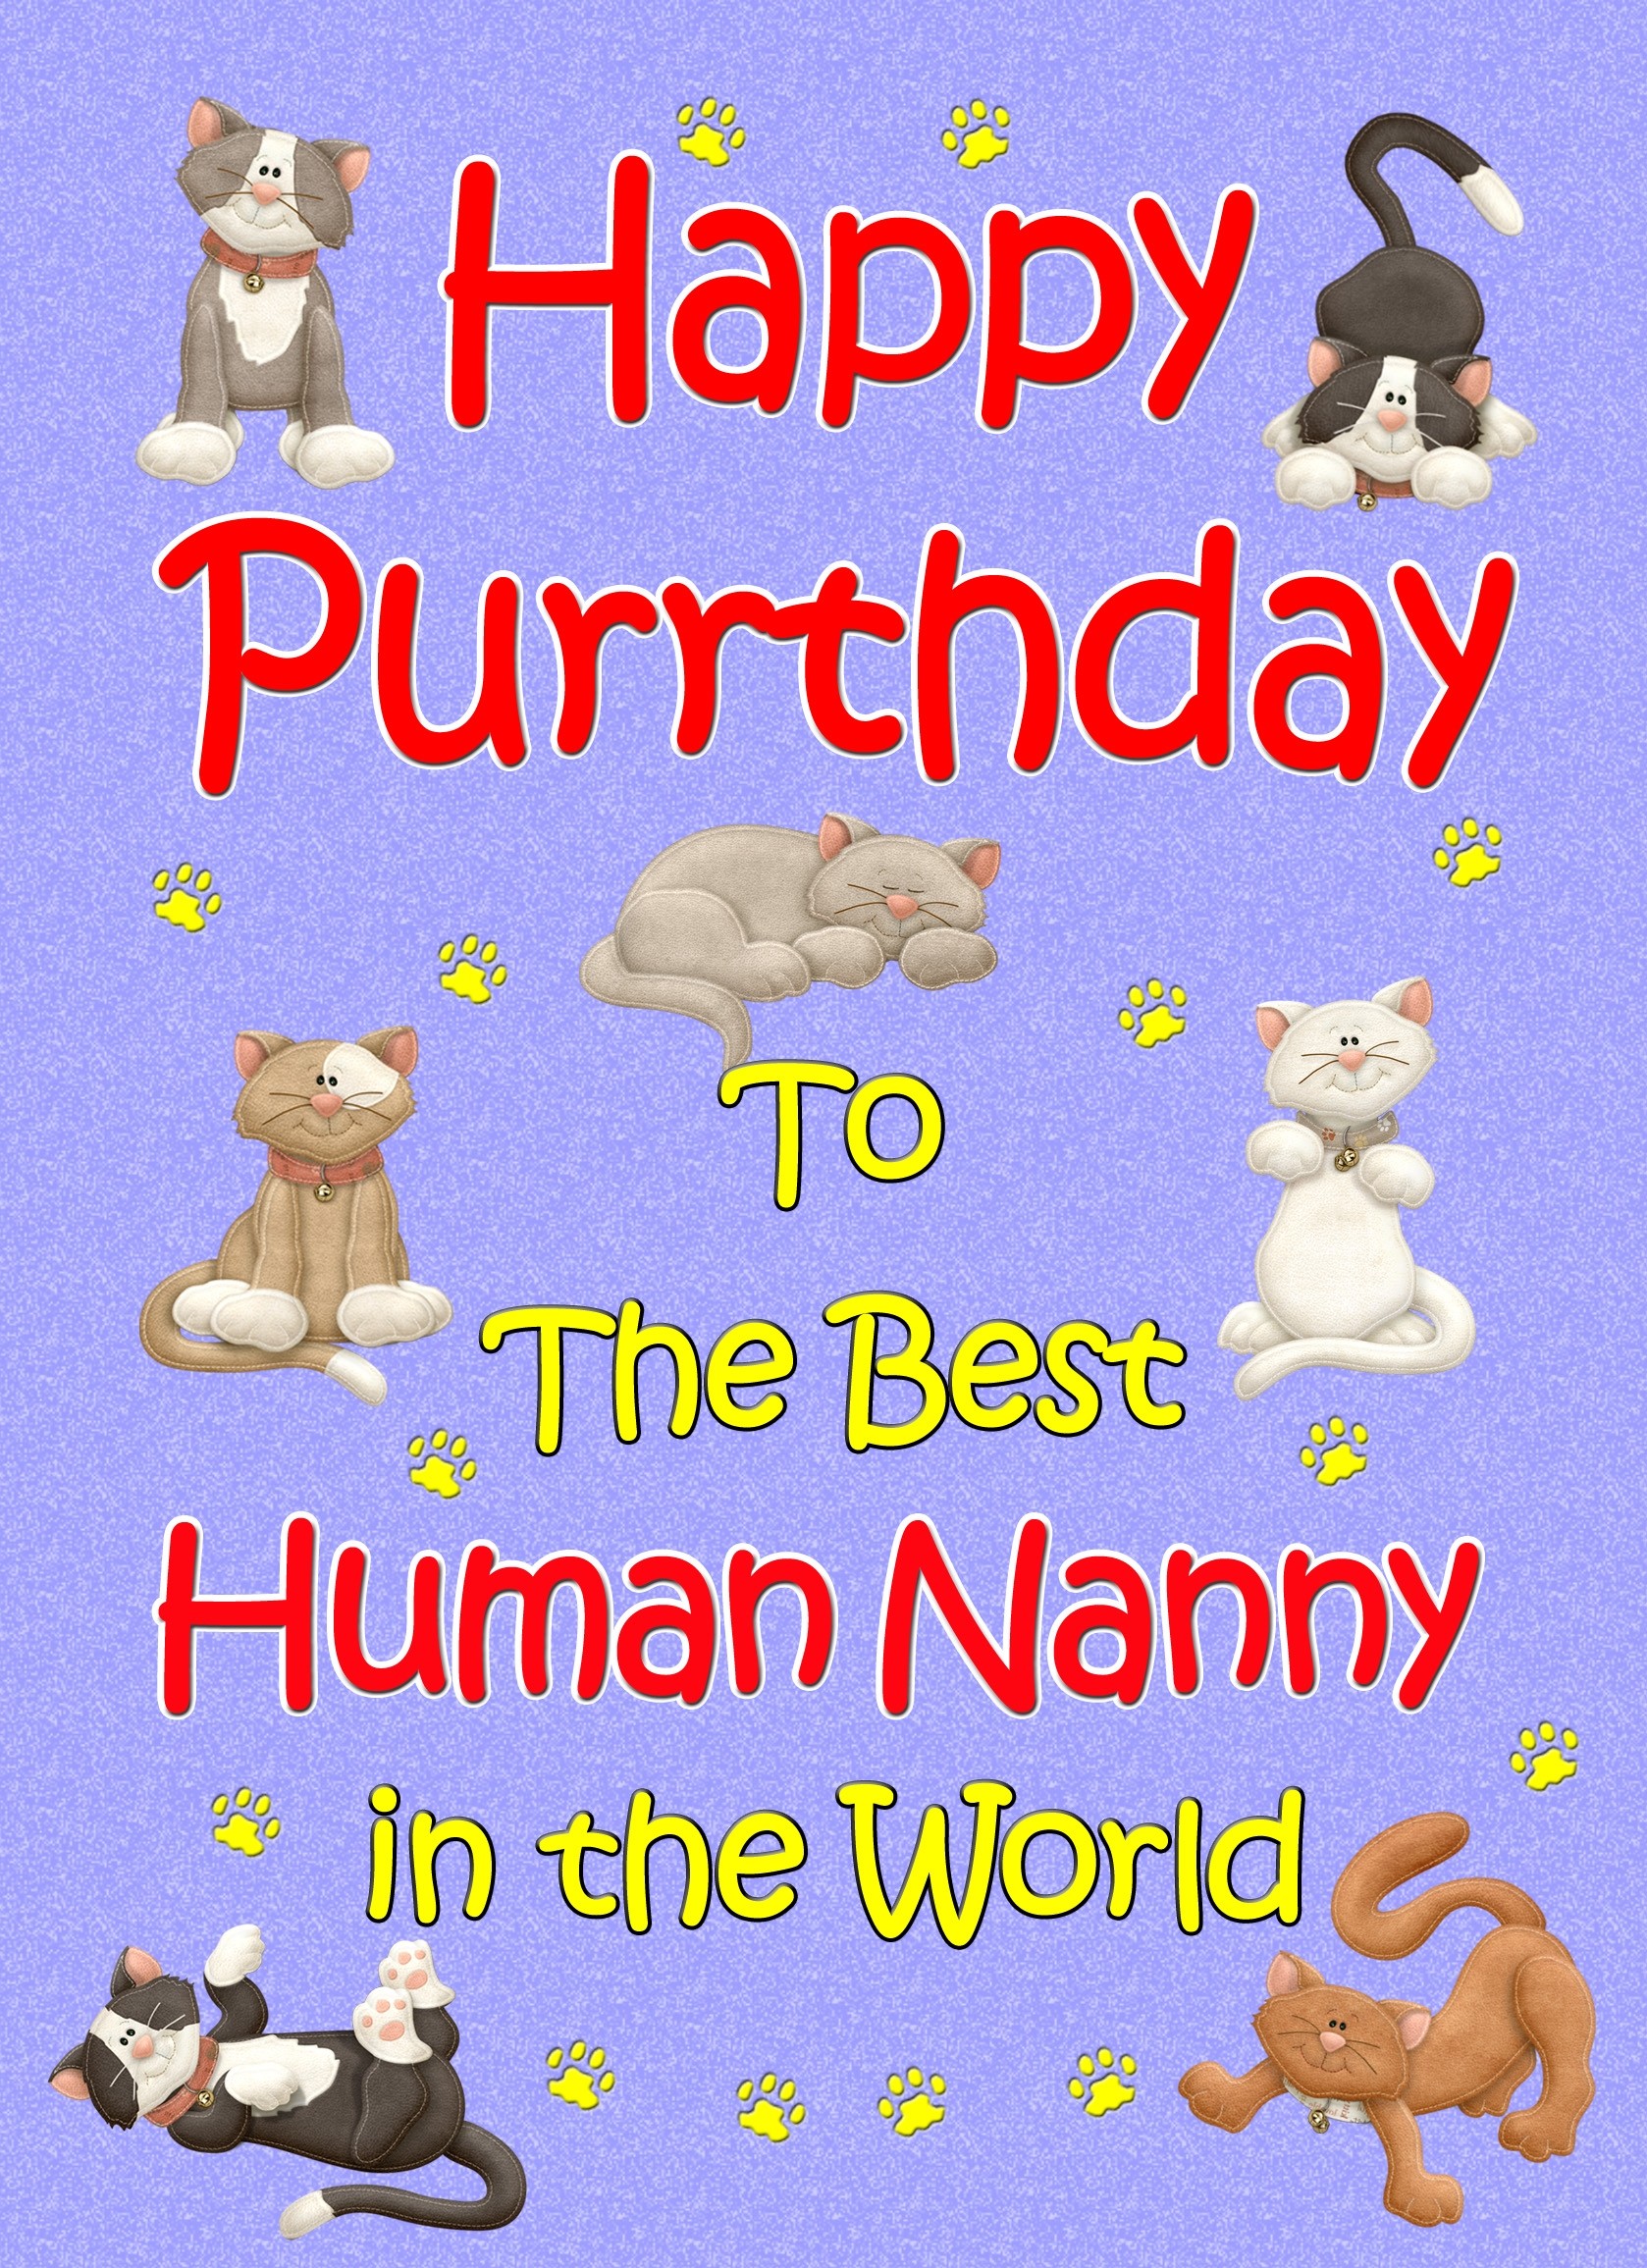 From The Cat Birthday Card (Lilac, Human Nanny, Happy Purrthday)